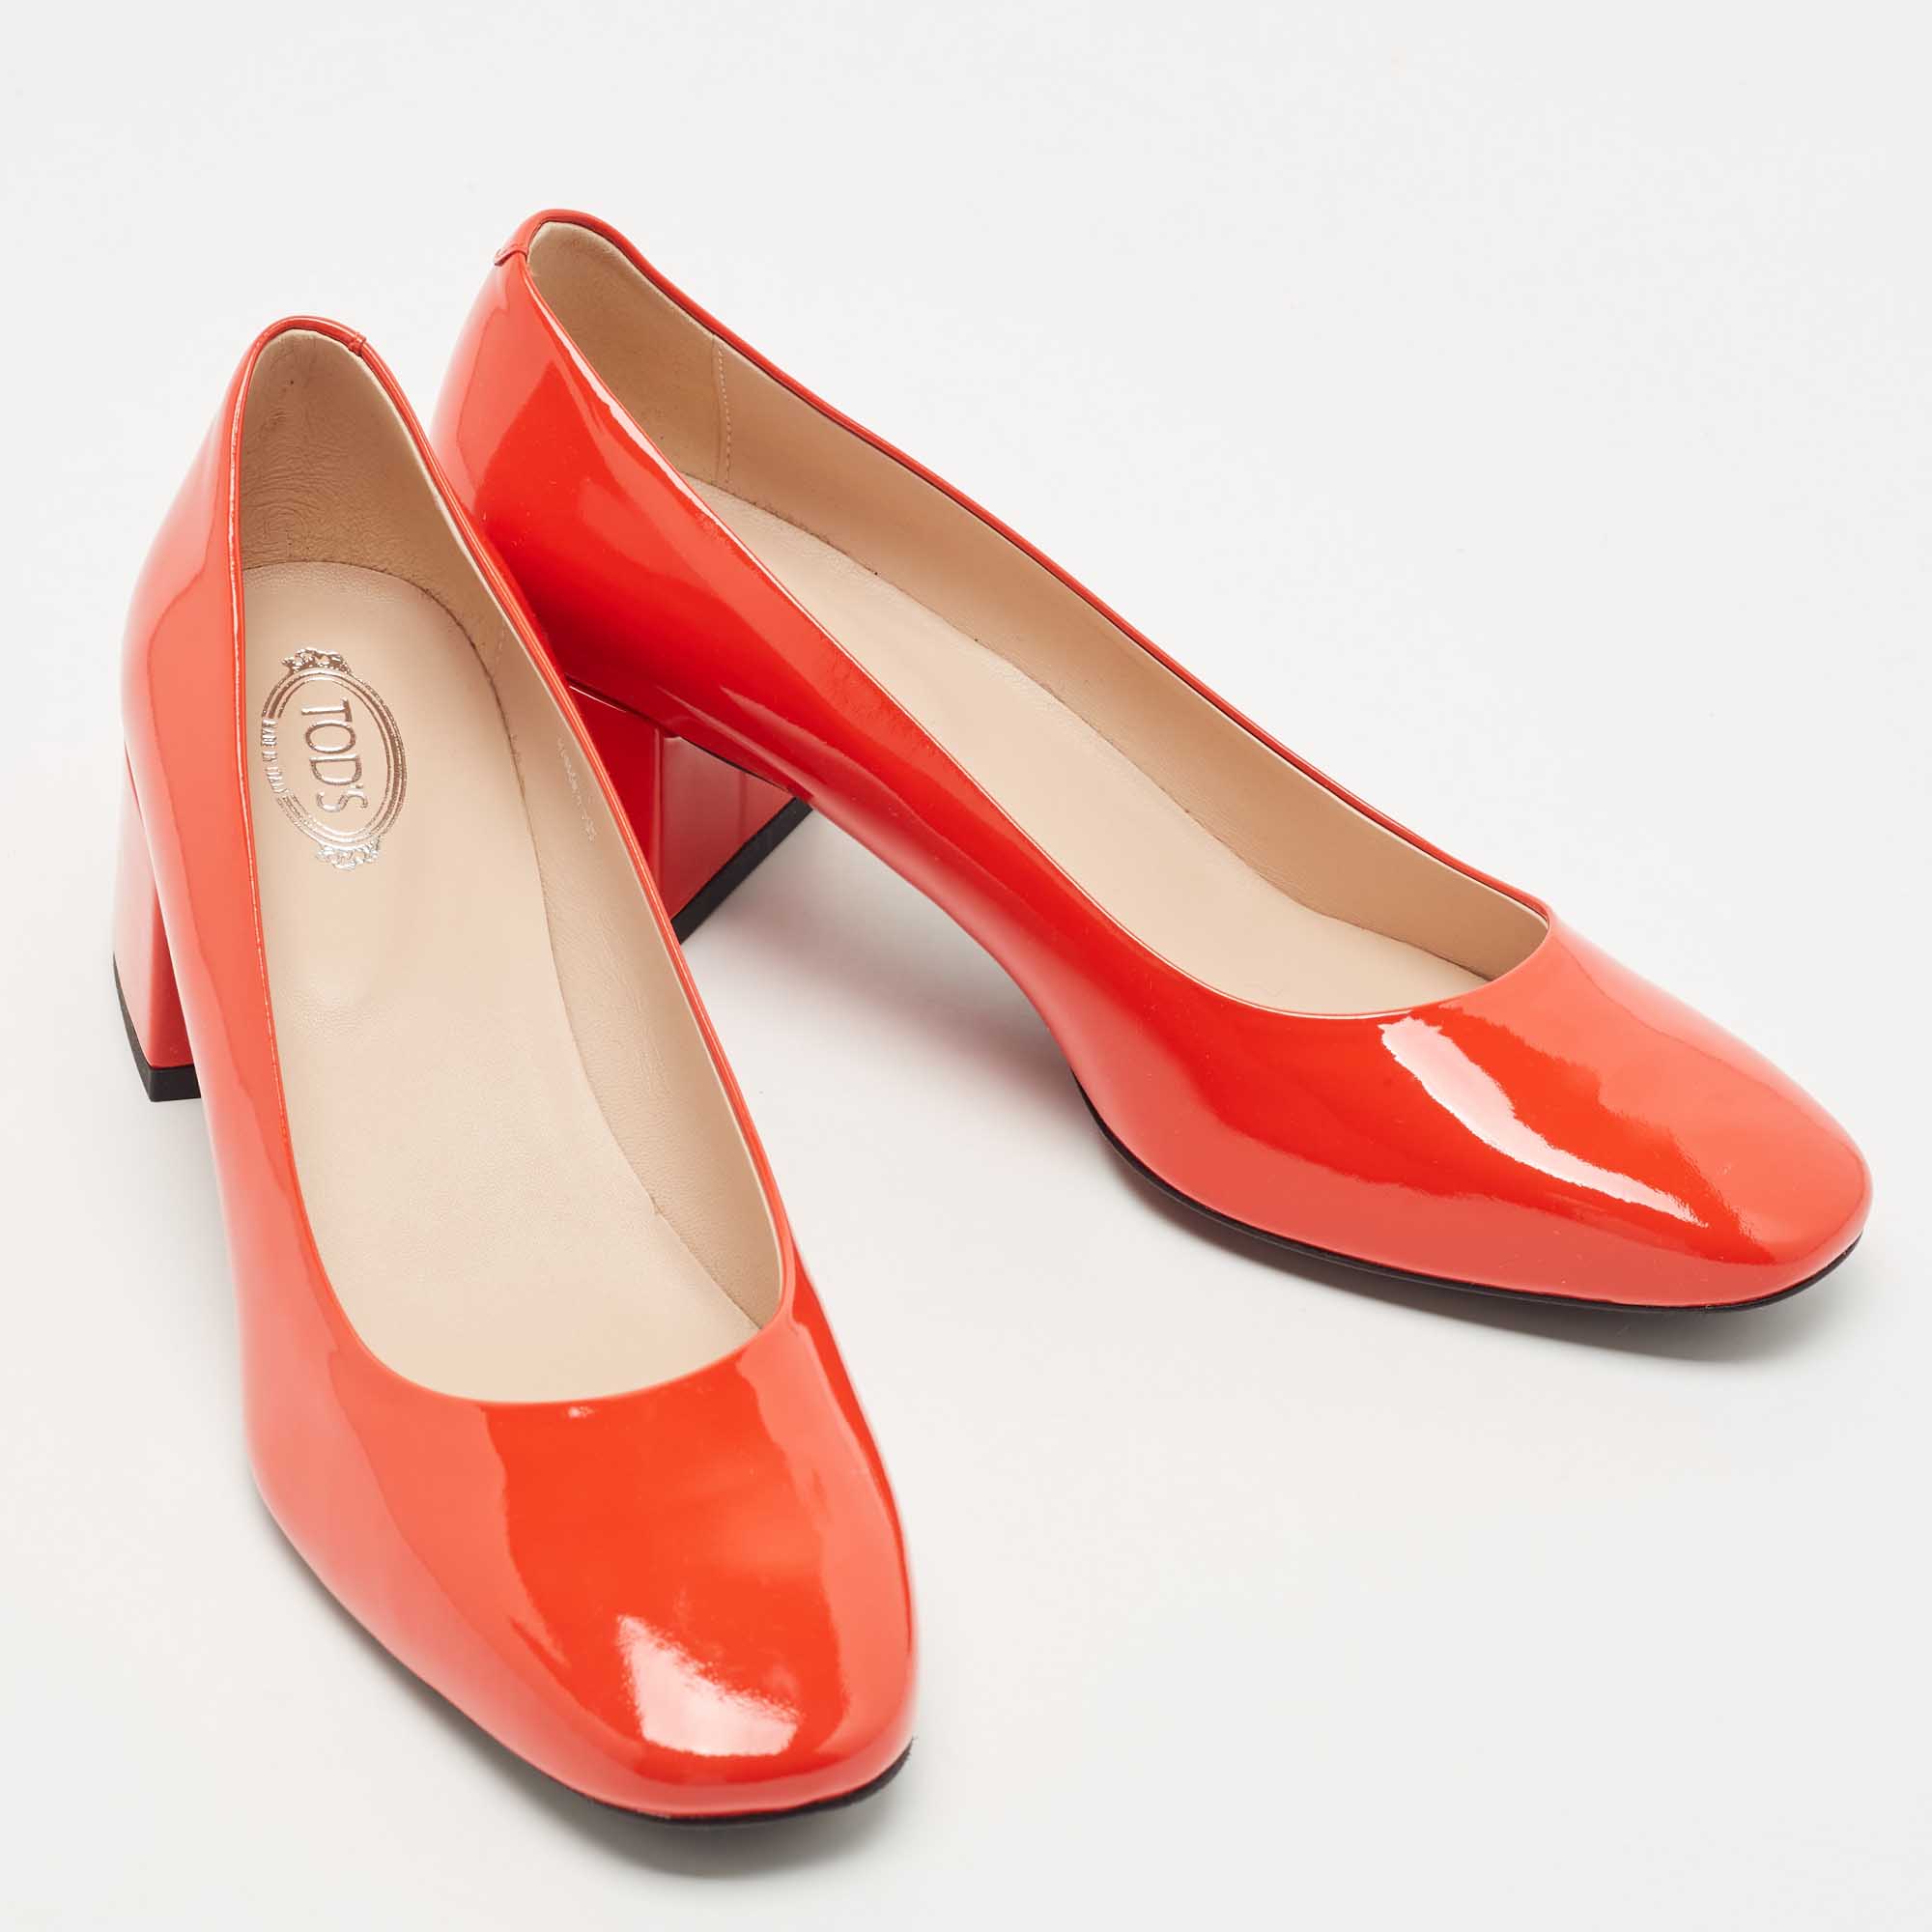 Tod's Red Patent Leather Block Heel Pumps Size 38.5